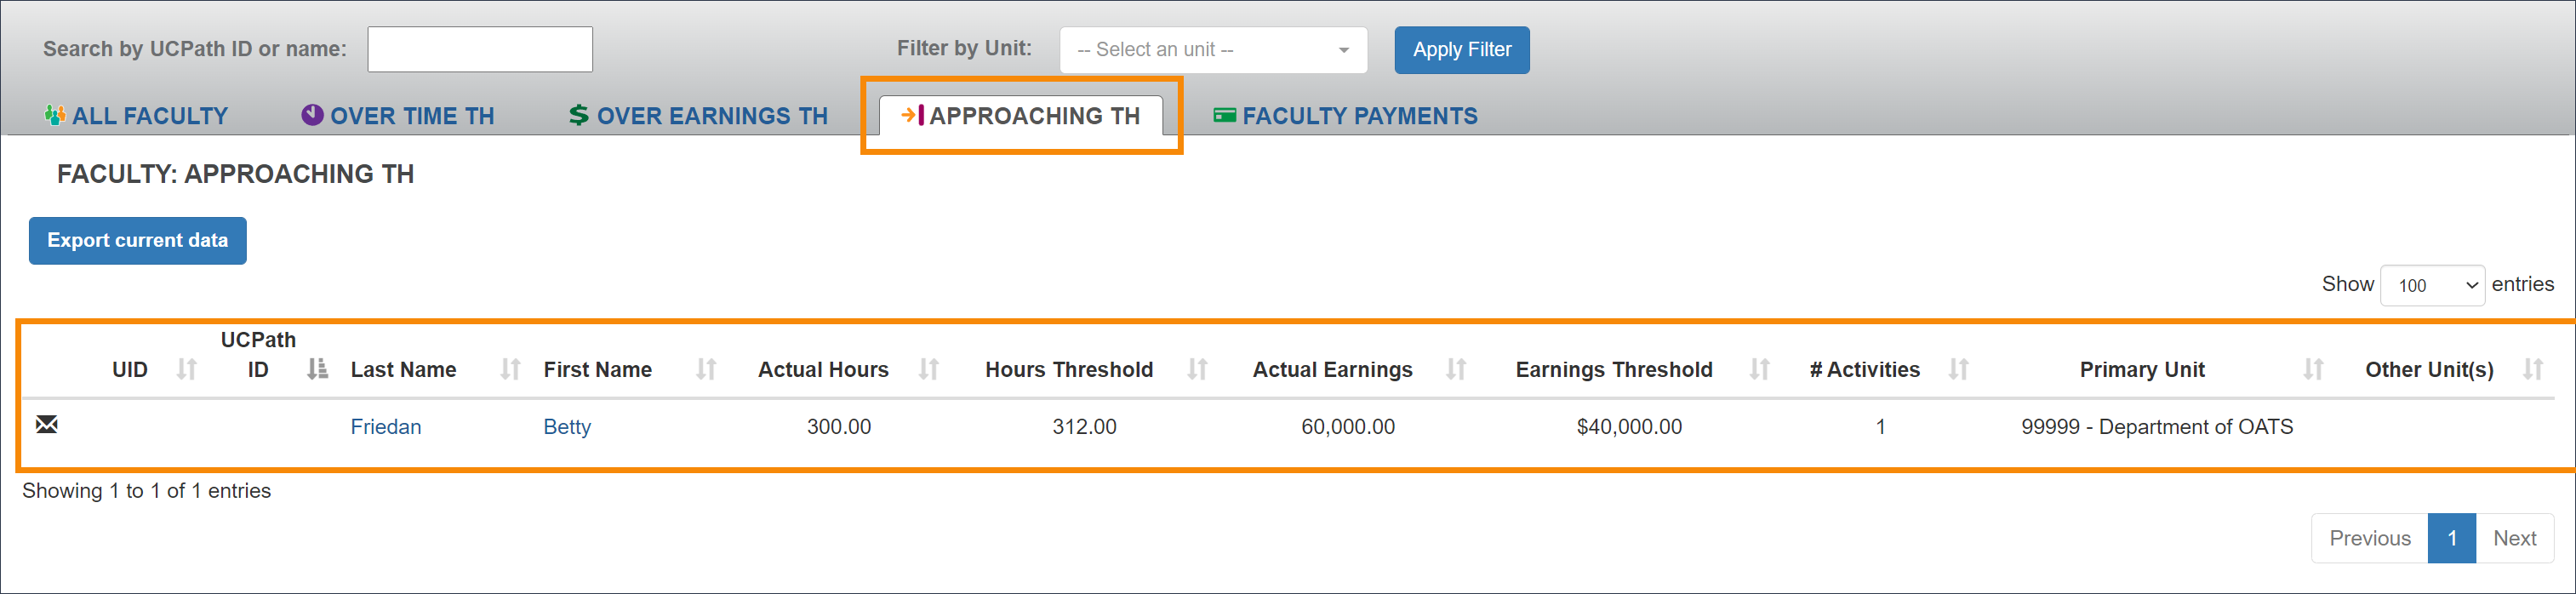 Approaching Threshold tab that lists faculty members that are within 10% of reaching their time threshold